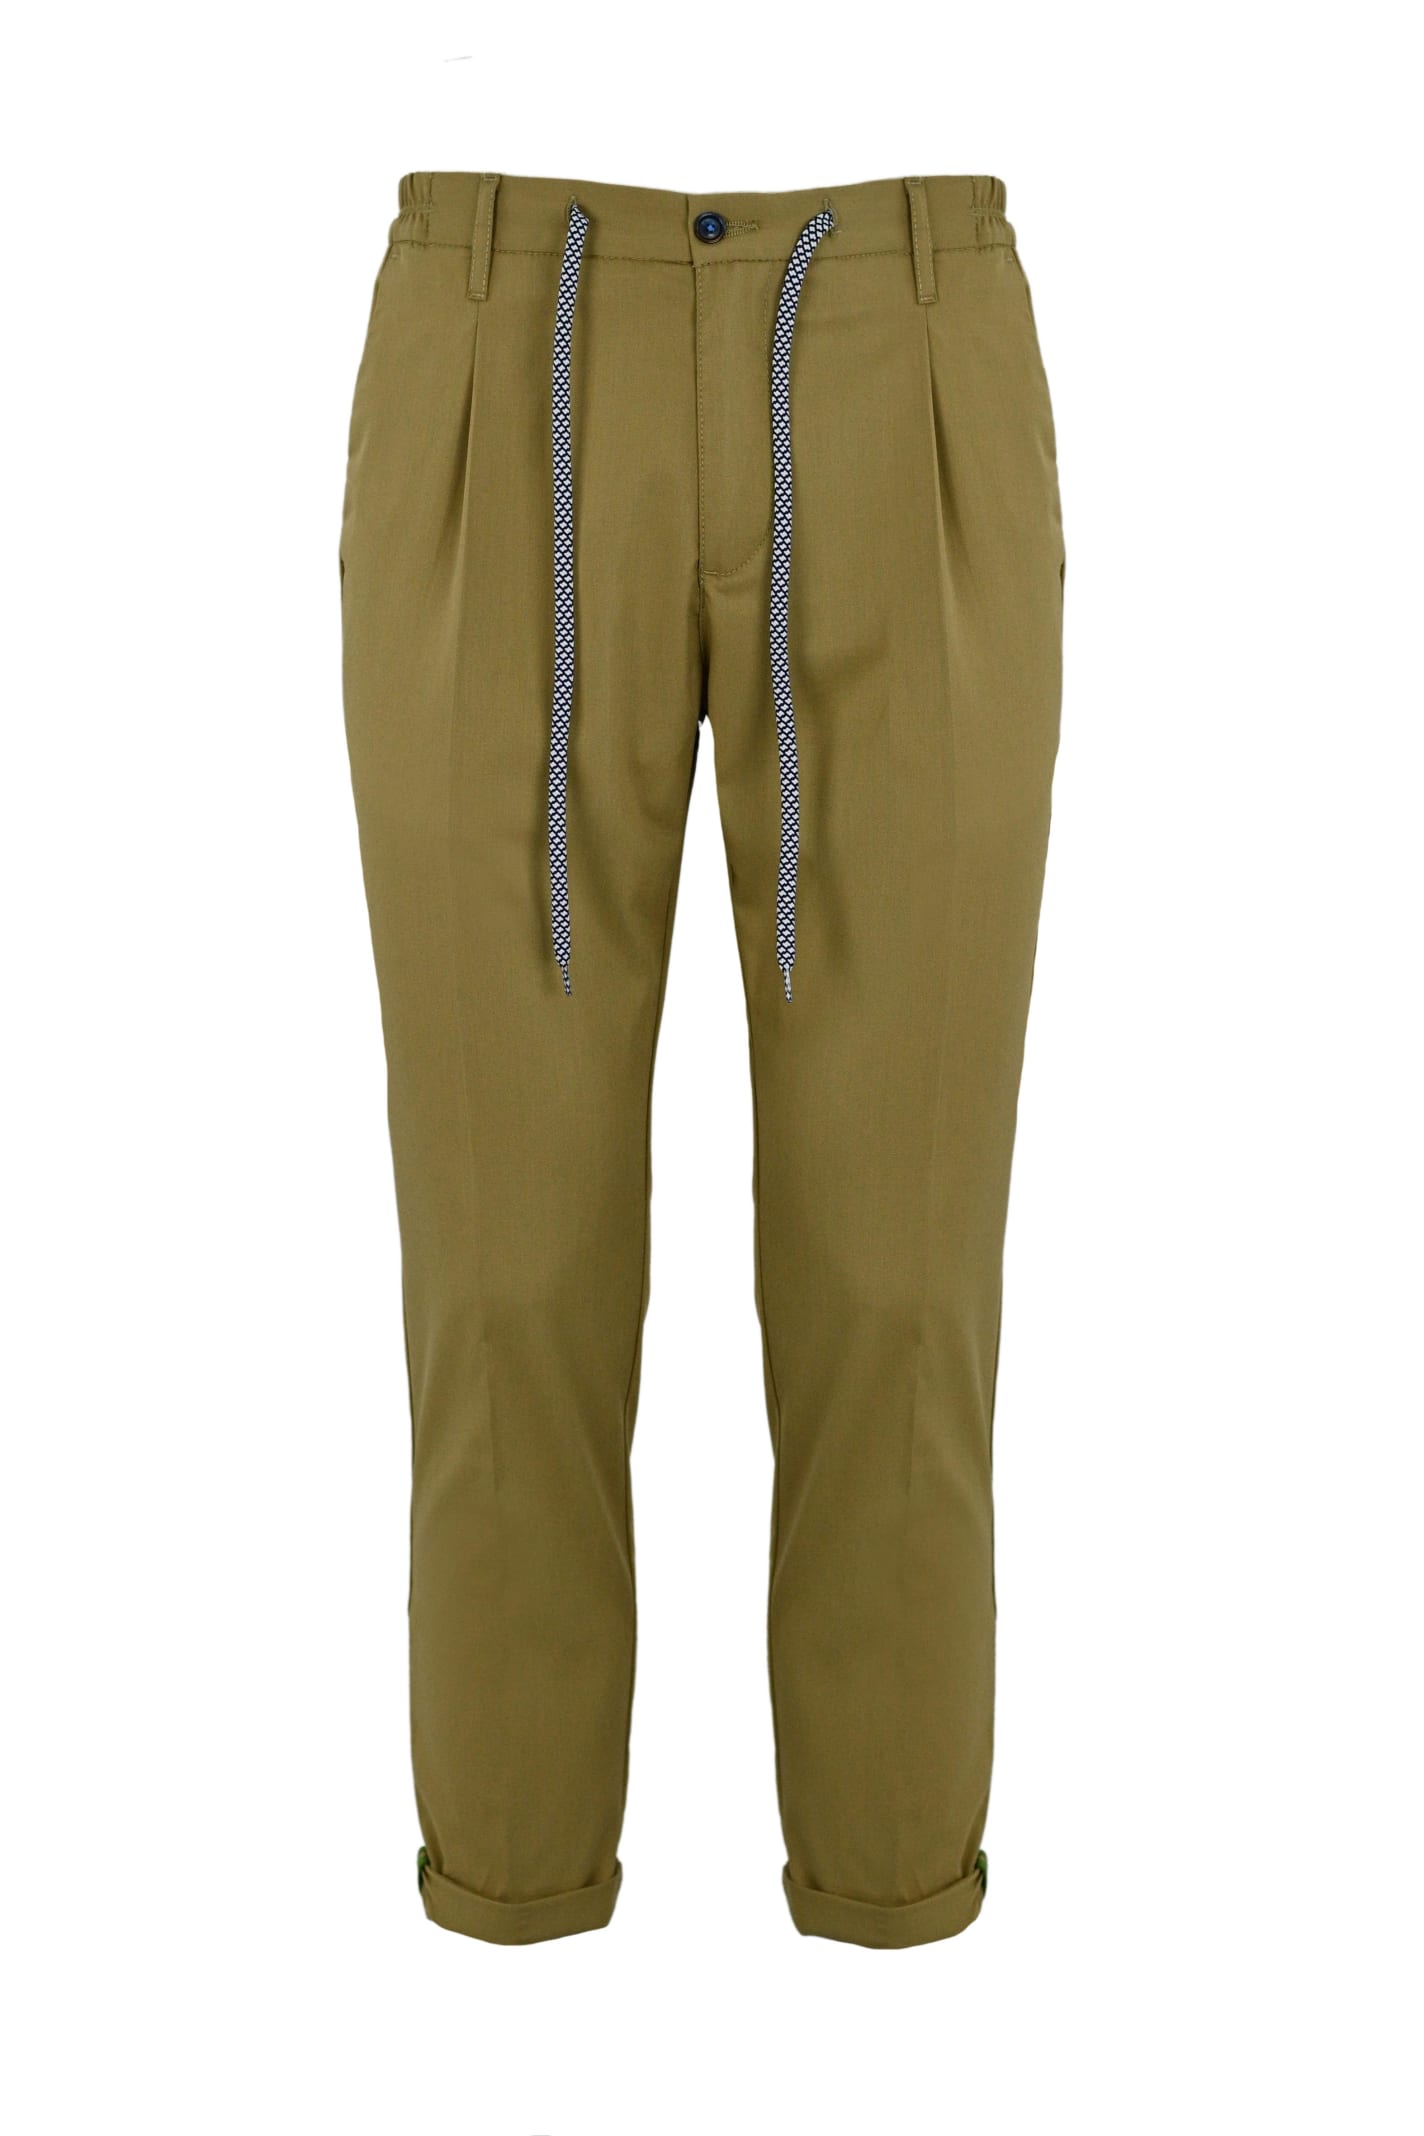 Daniele Alessandrini Trousers With Laces